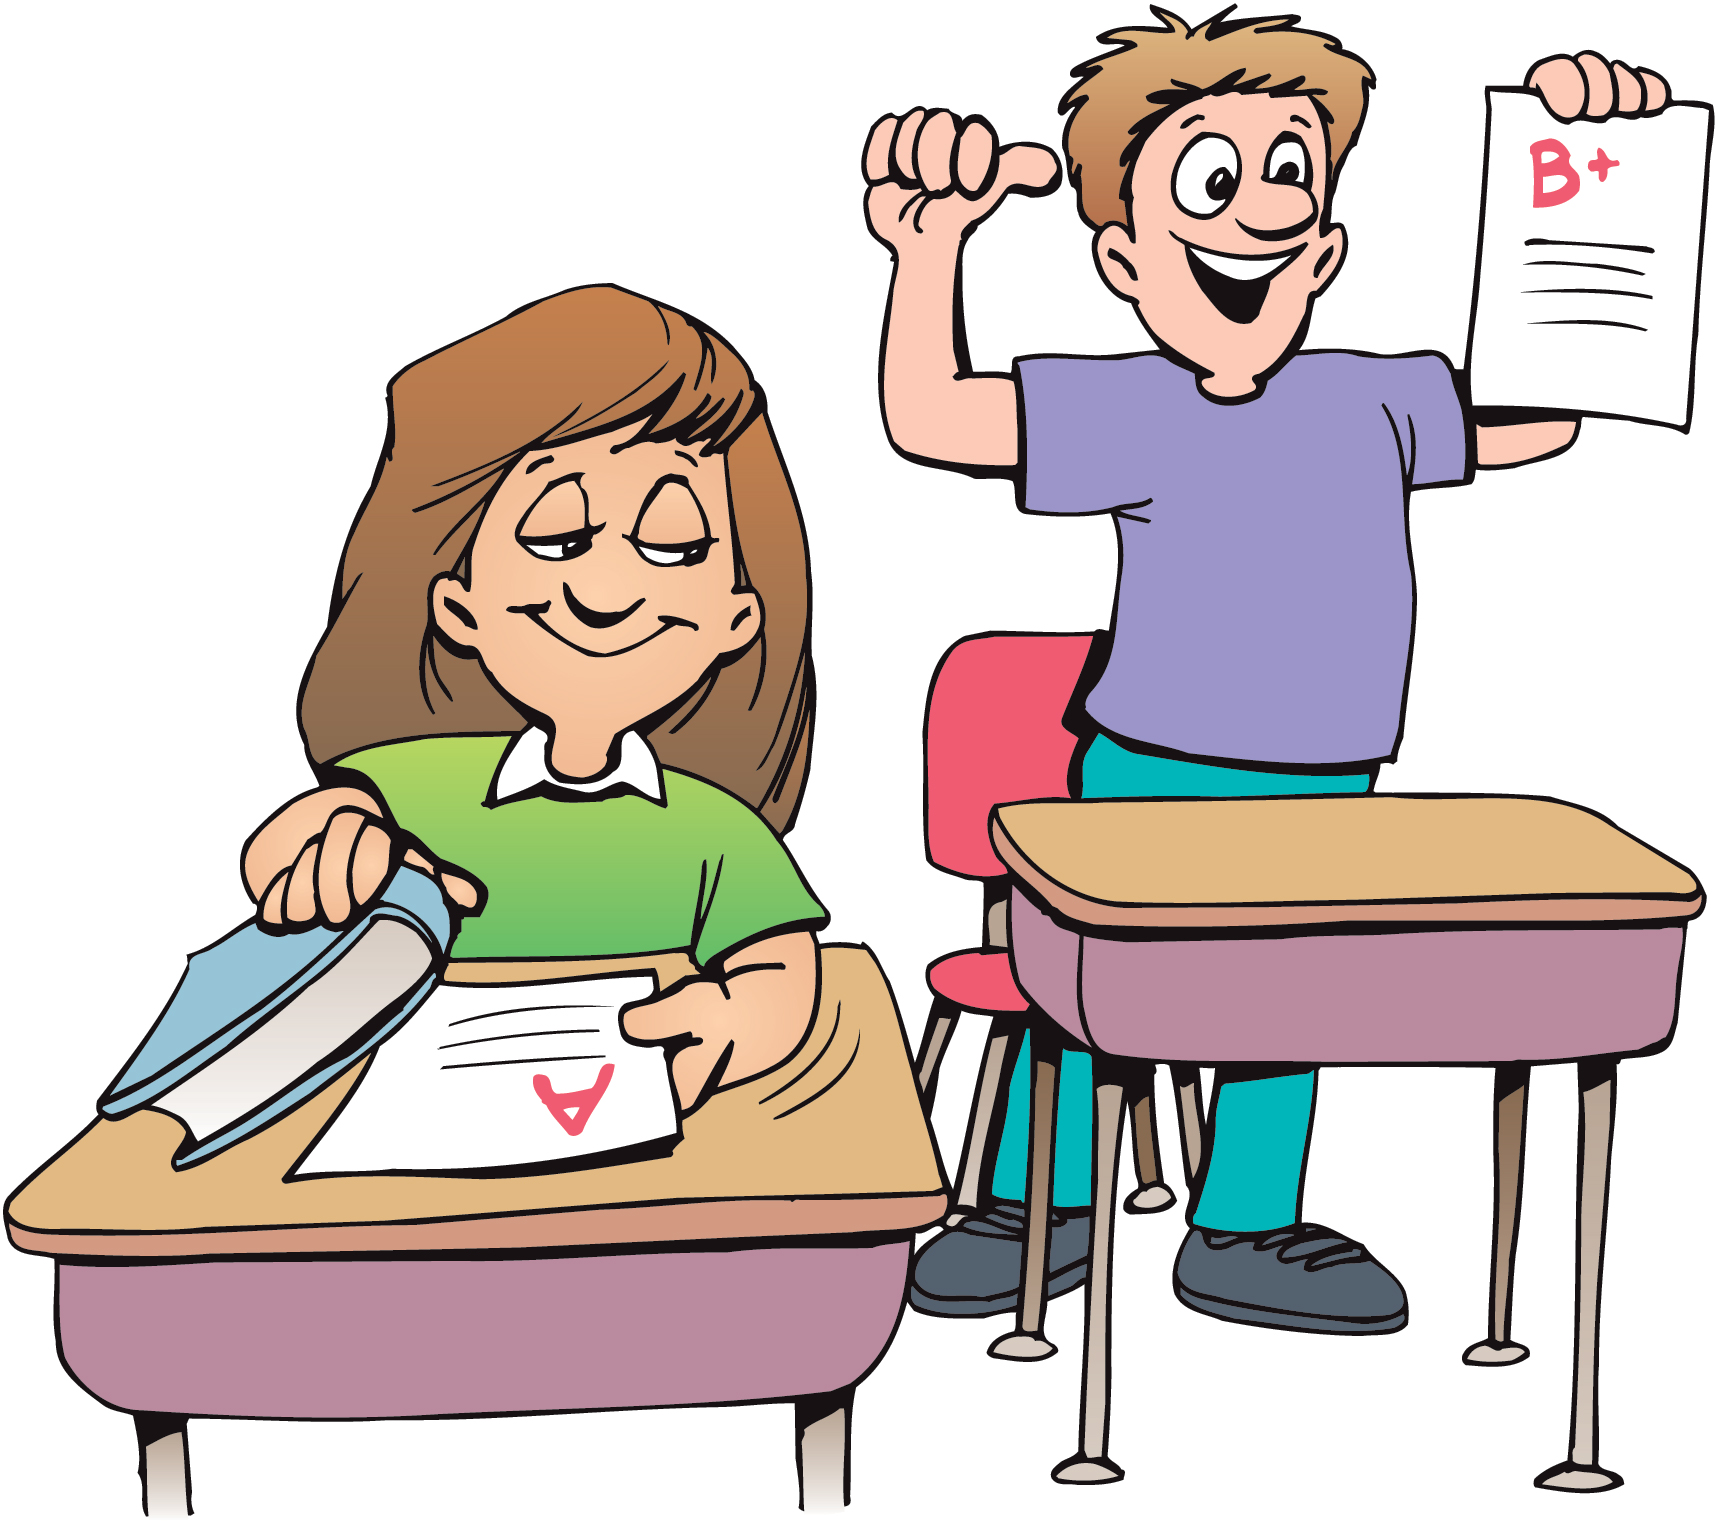 Free Images Of Students In A Classroom, Download Free Images Of